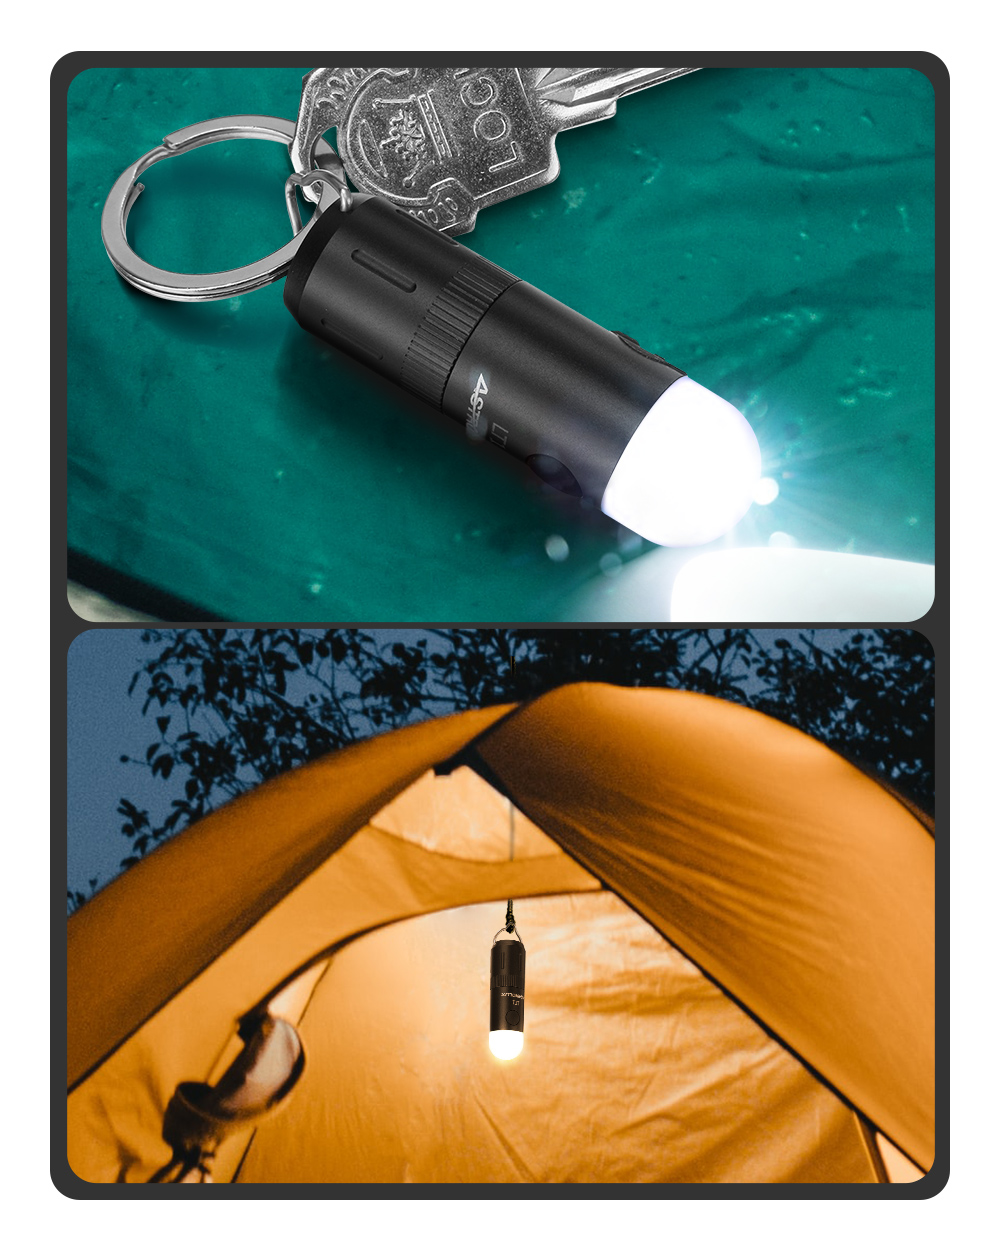 Astroluxreg-LT1-SST20-350LM-Tiny-Strong-Camping-Lantern-With-14250-Battery-Type-C-Rechargeable-Mini--1906003-11